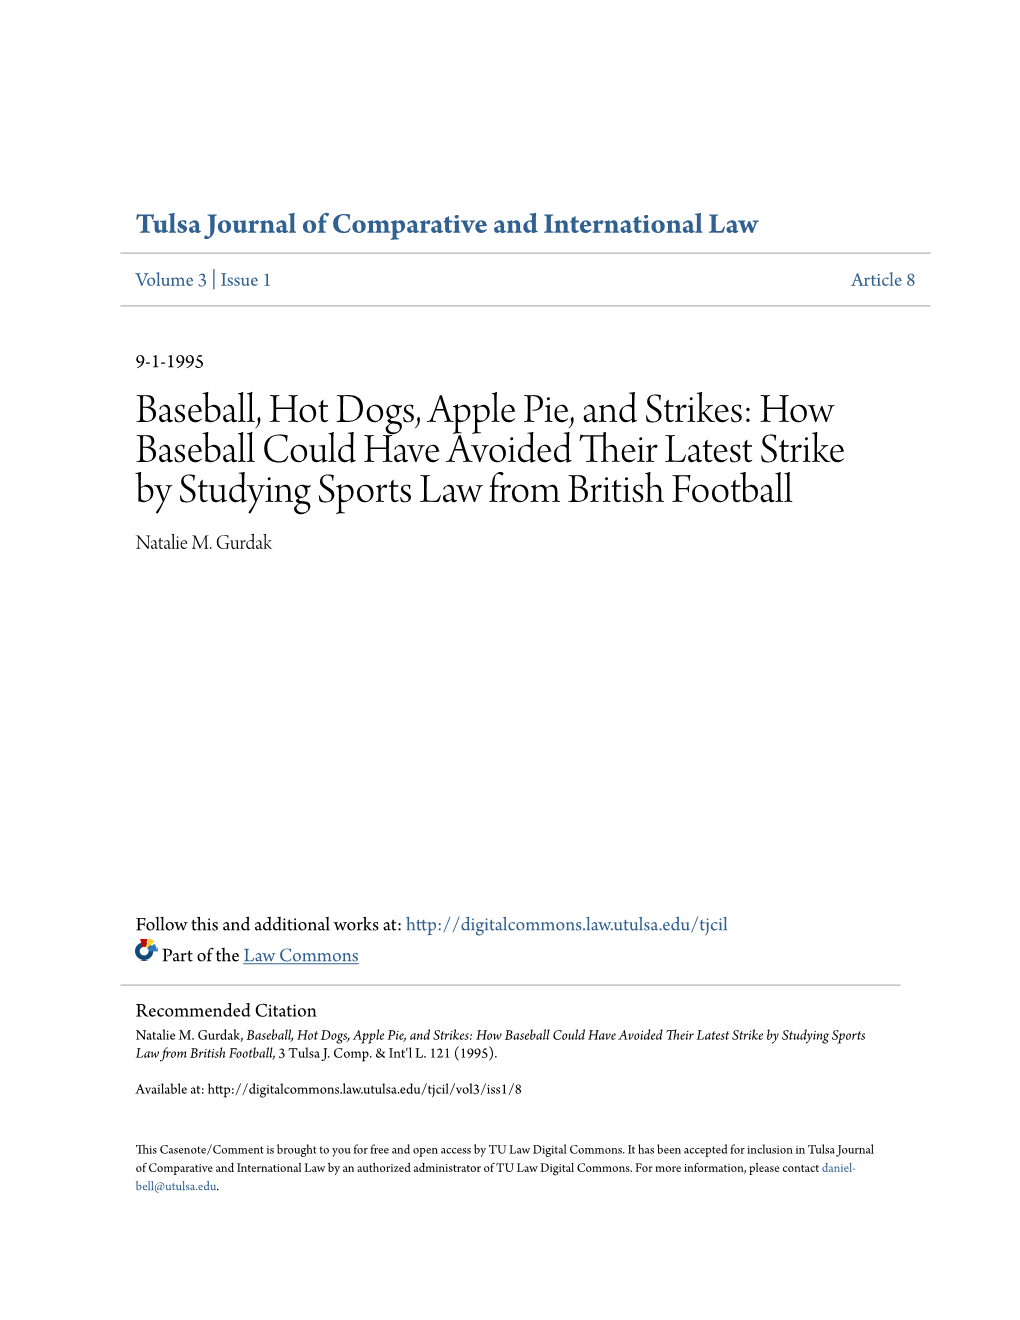 Baseball, Hot Dogs, Apple Pie, and Strikes: How Baseball Could Have Avoided Their Latest Strike by Studying Sports Law from British Football Natalie M